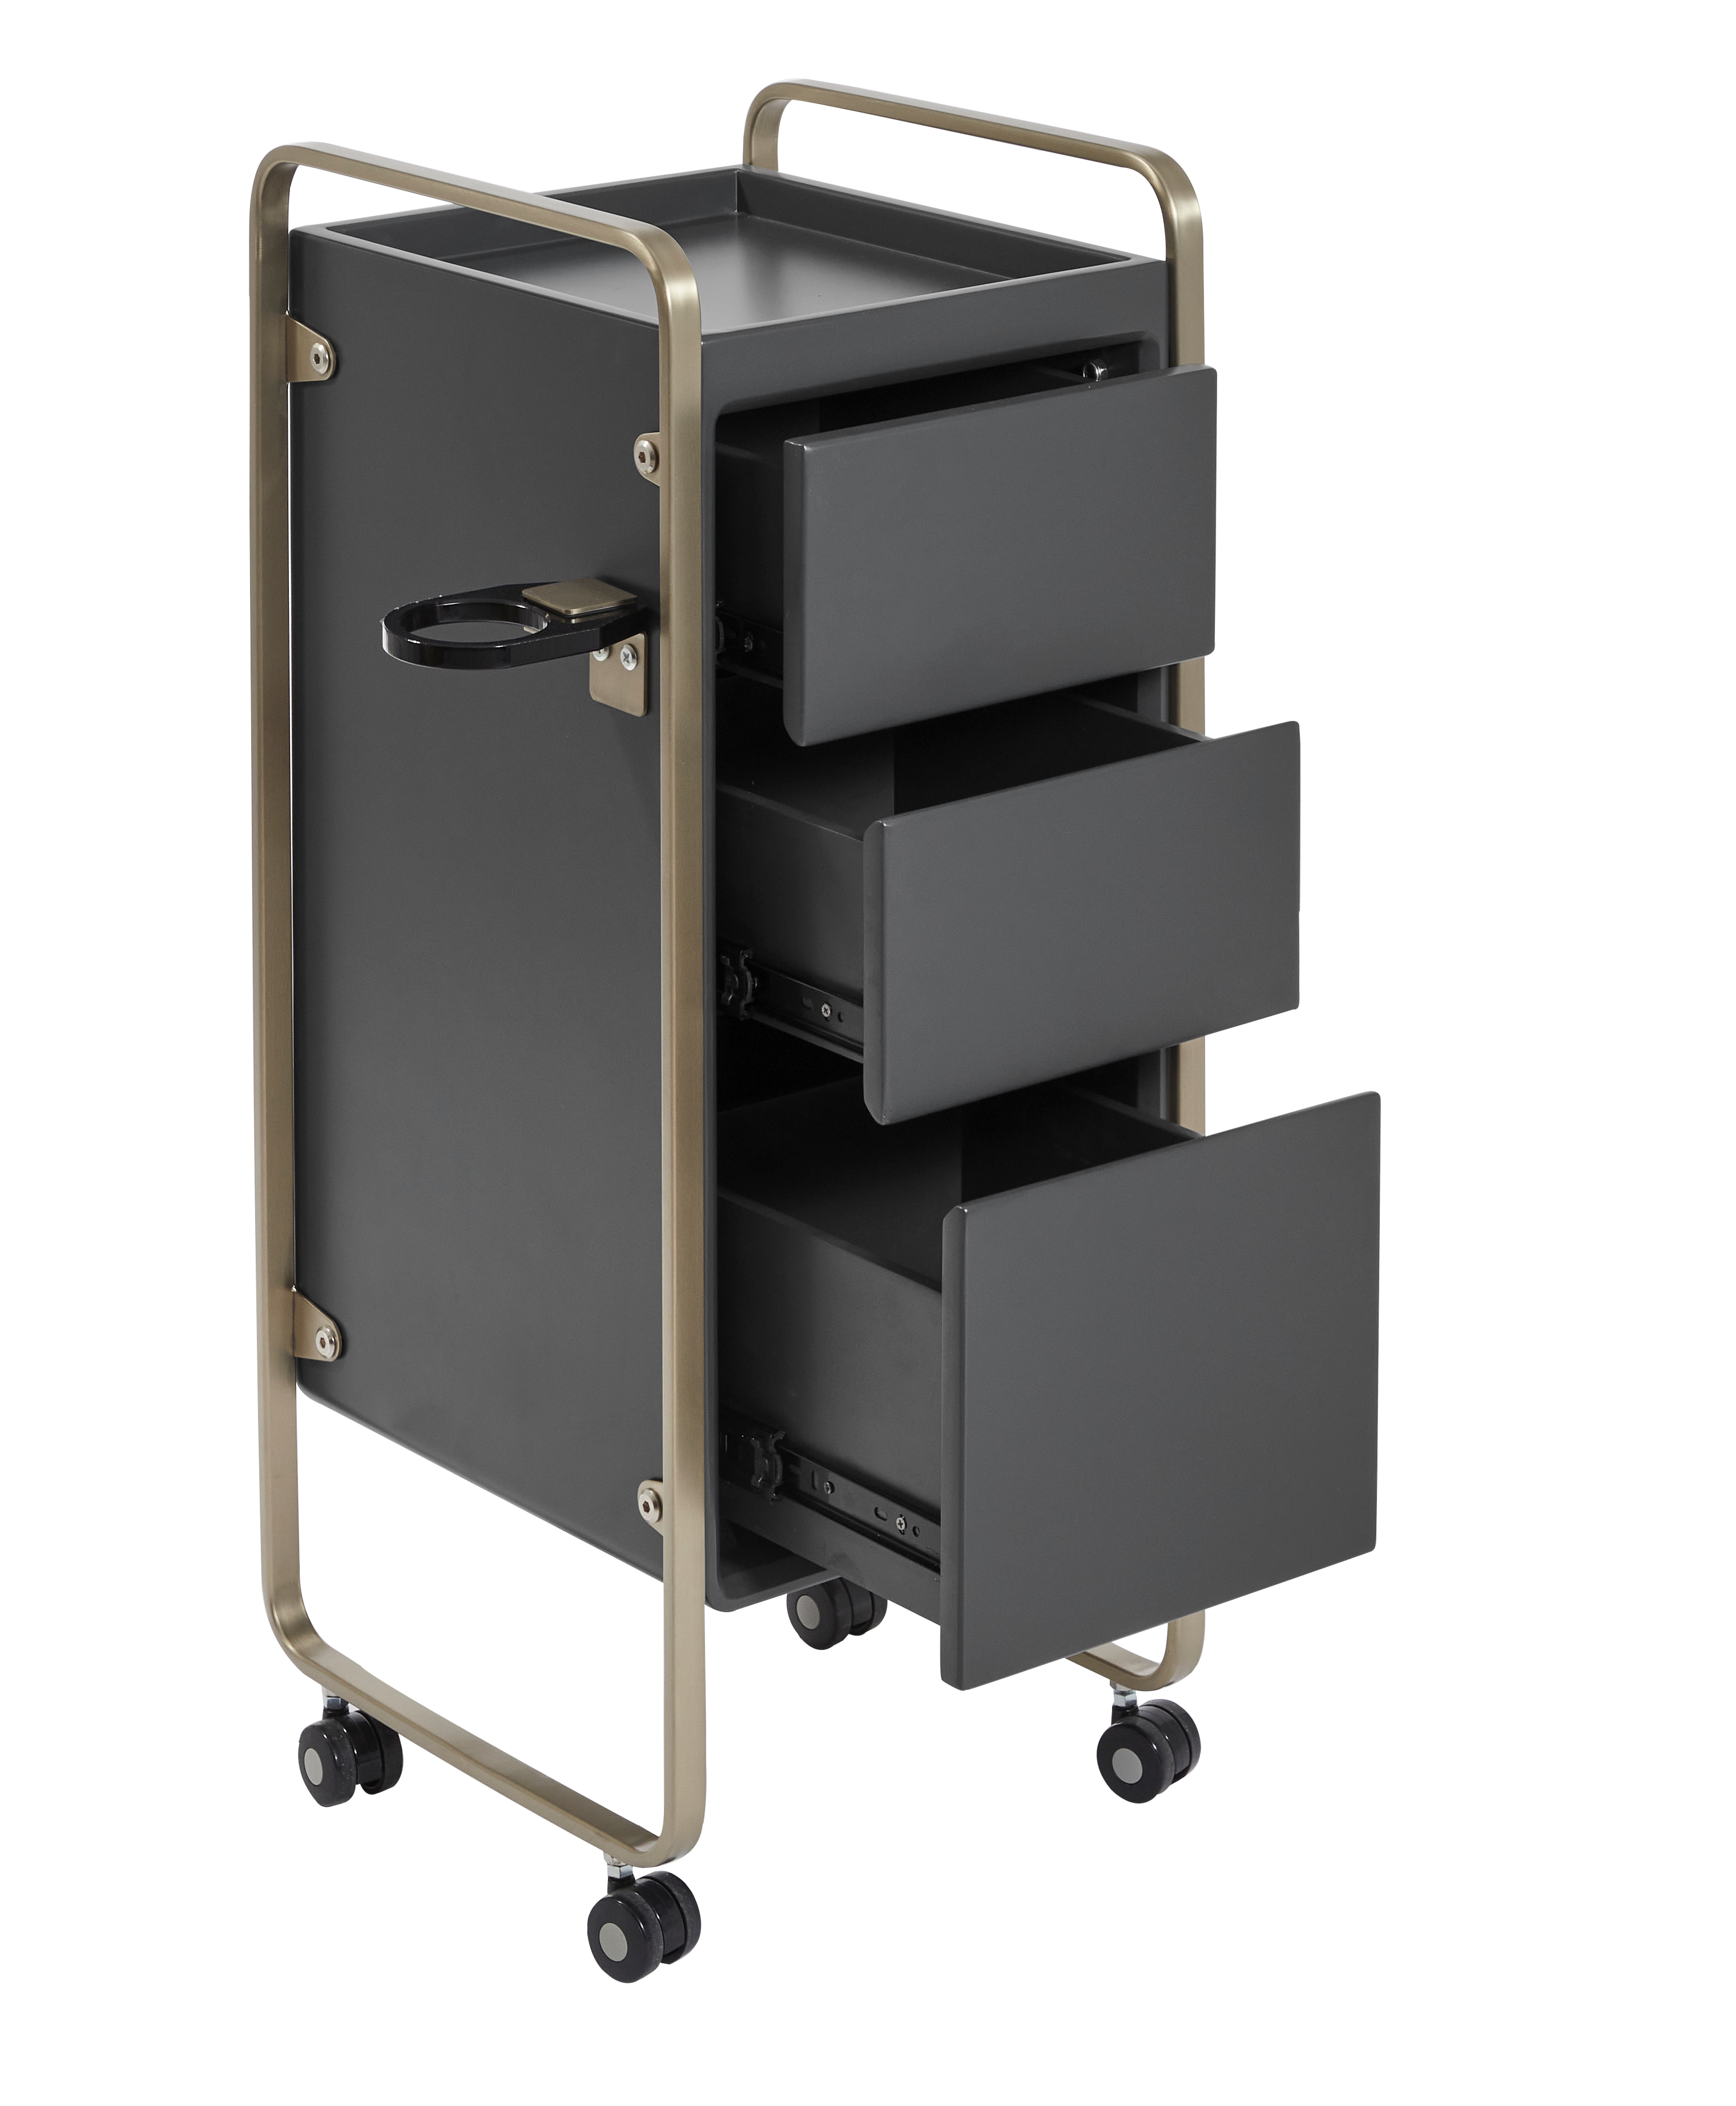 The Sapphire Salon Trolley - Charcoal Black & Champagne Gold by SEC